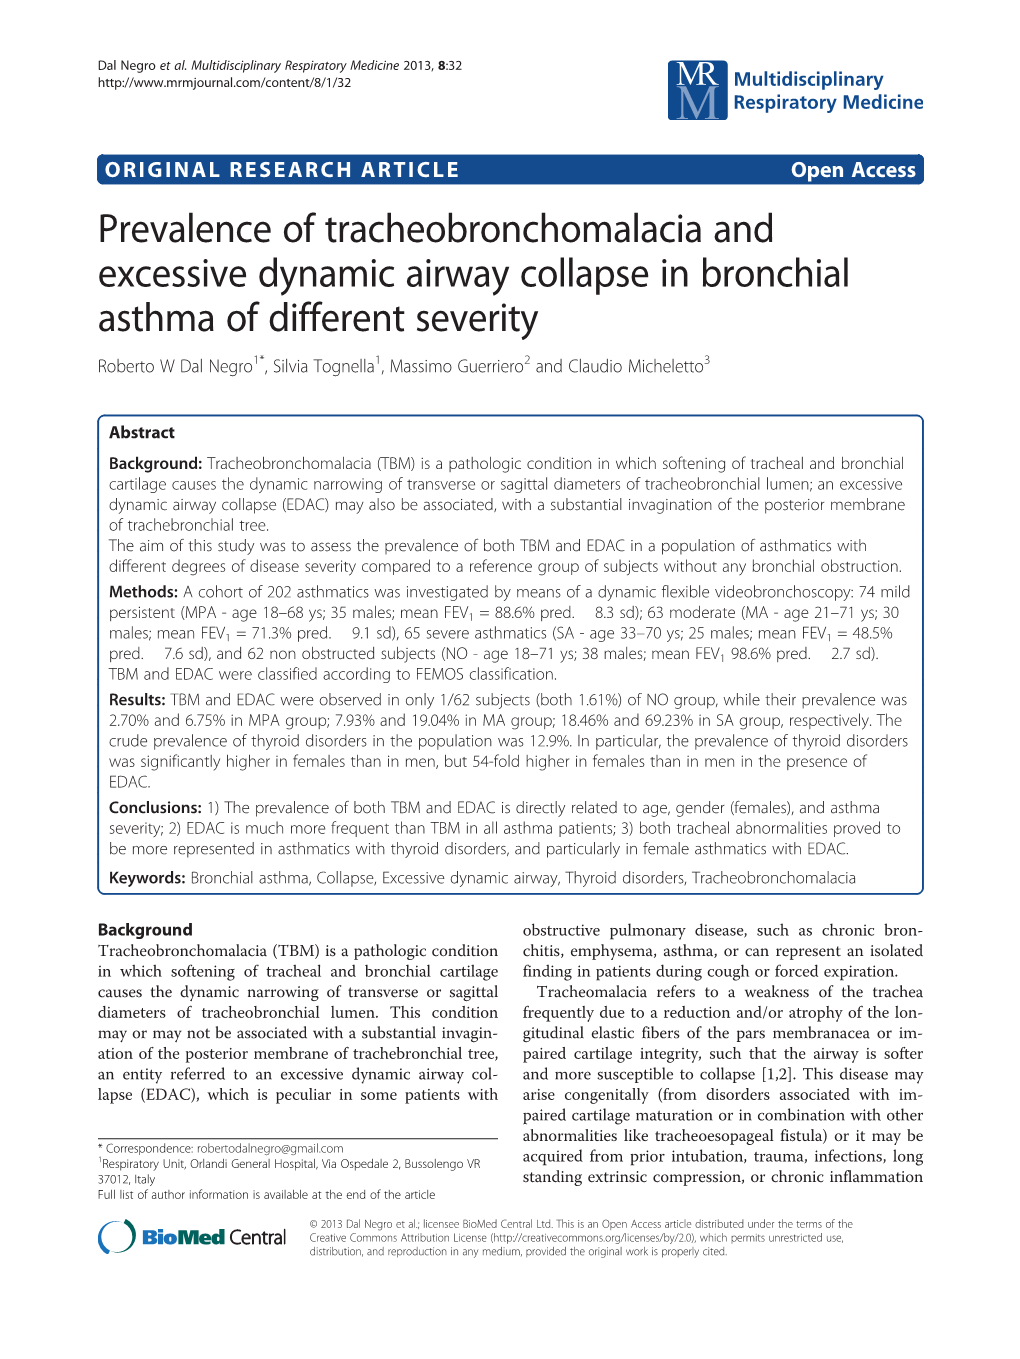 Prevalence of Tracheobronchomalacia and Excessive Dynamic Airway